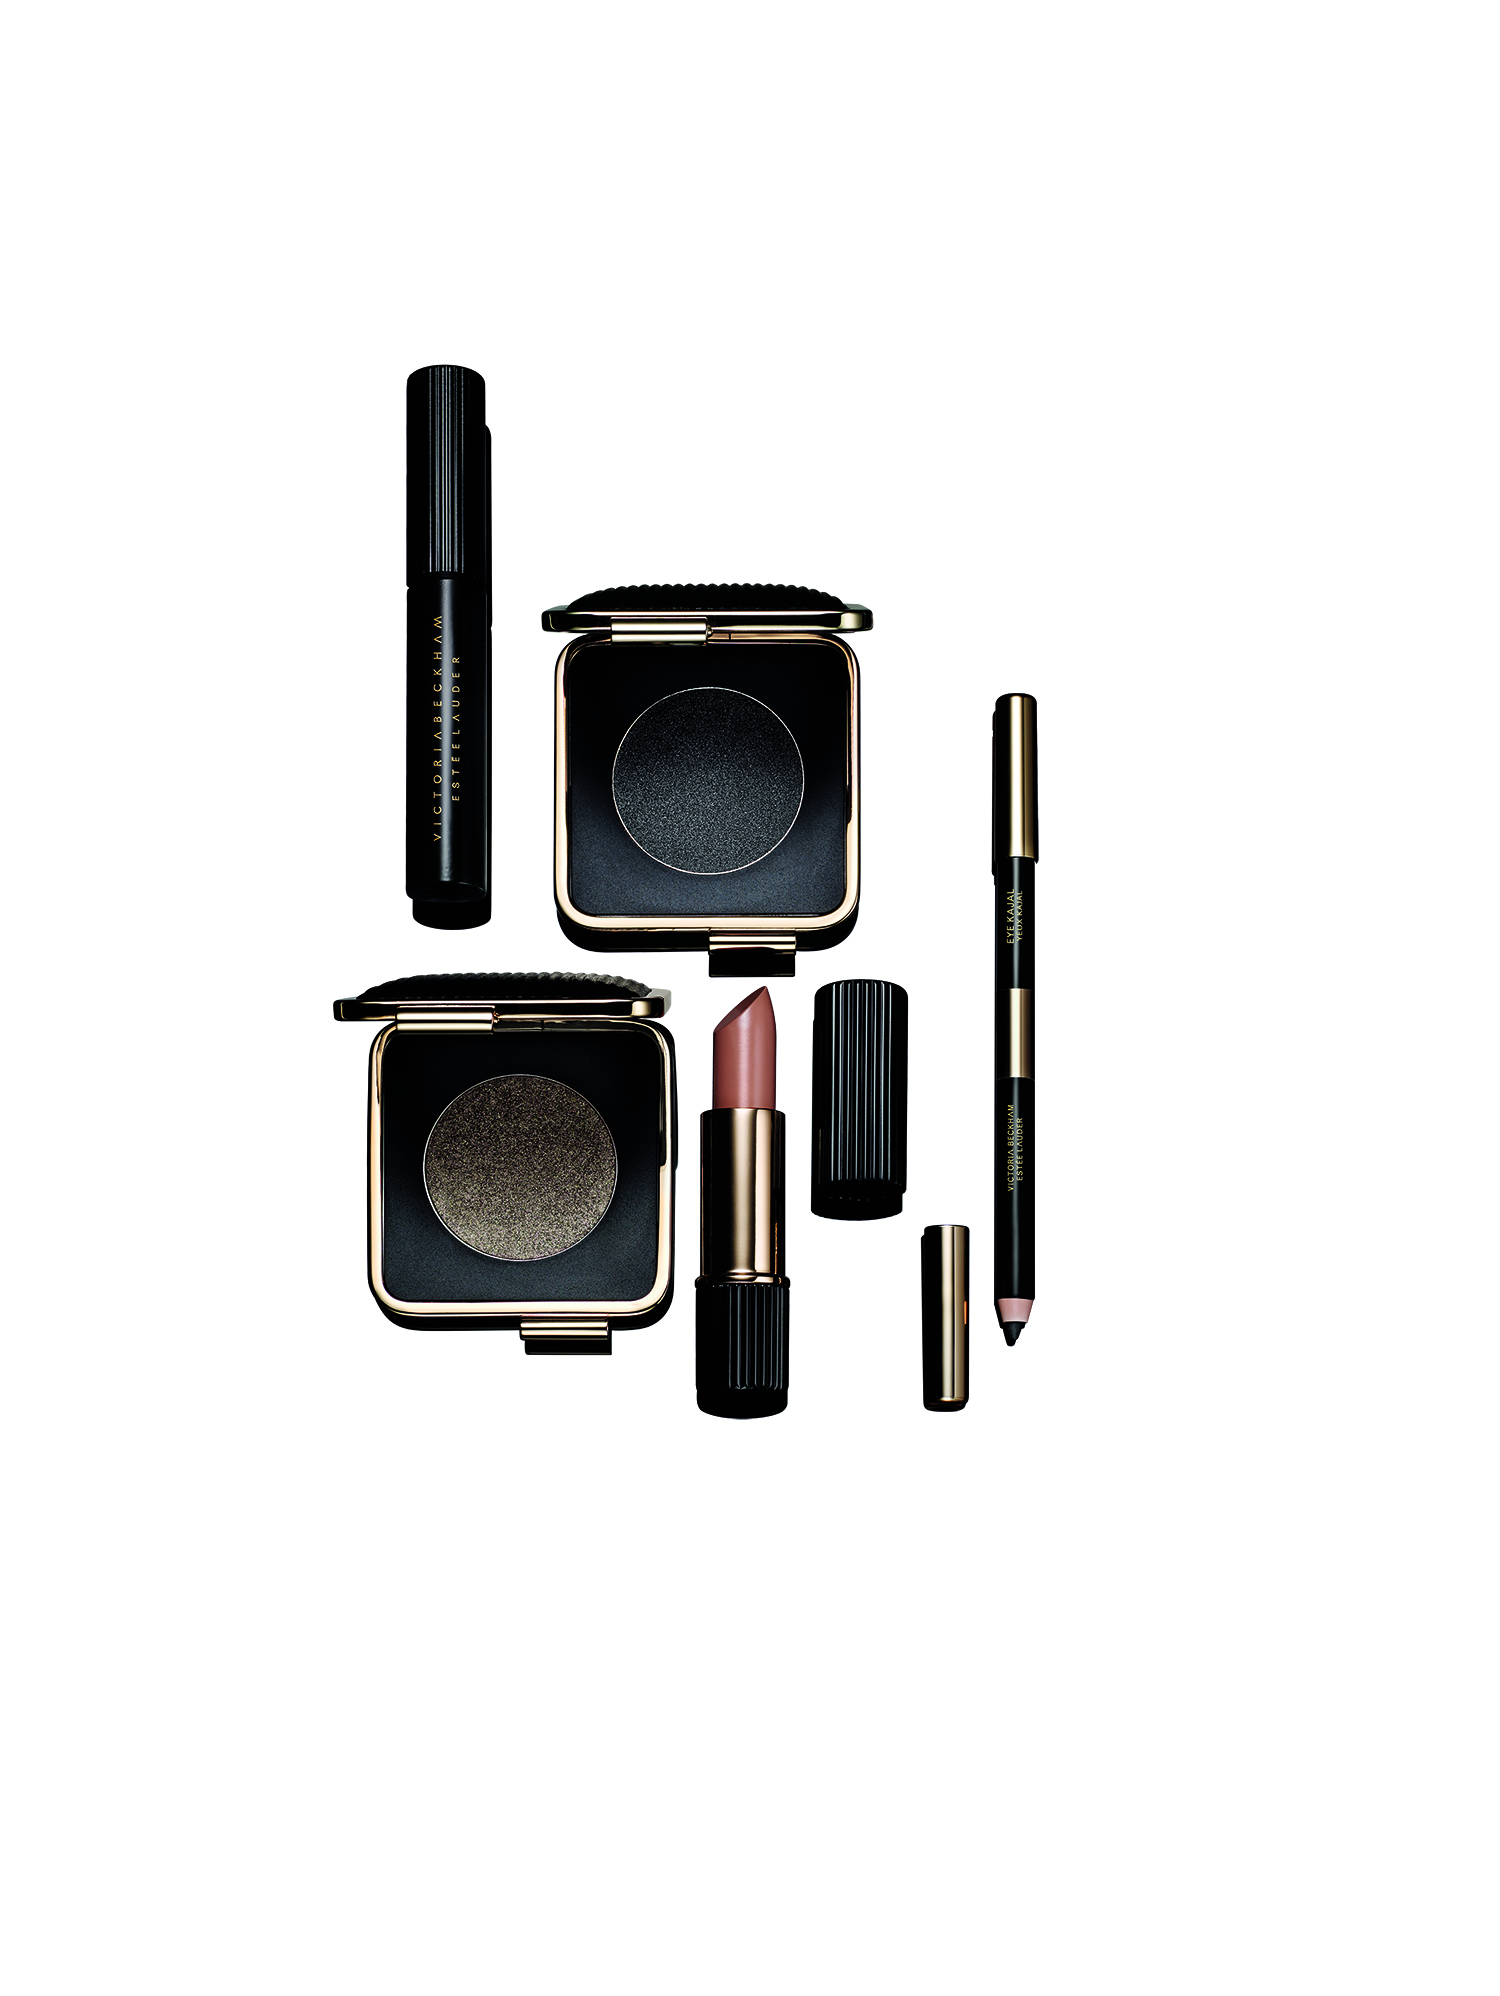 The limited edition Victoria Beckham Estée Lauder make-up collection described as ‘sexy, cool with a bit of rawness and edge’ 